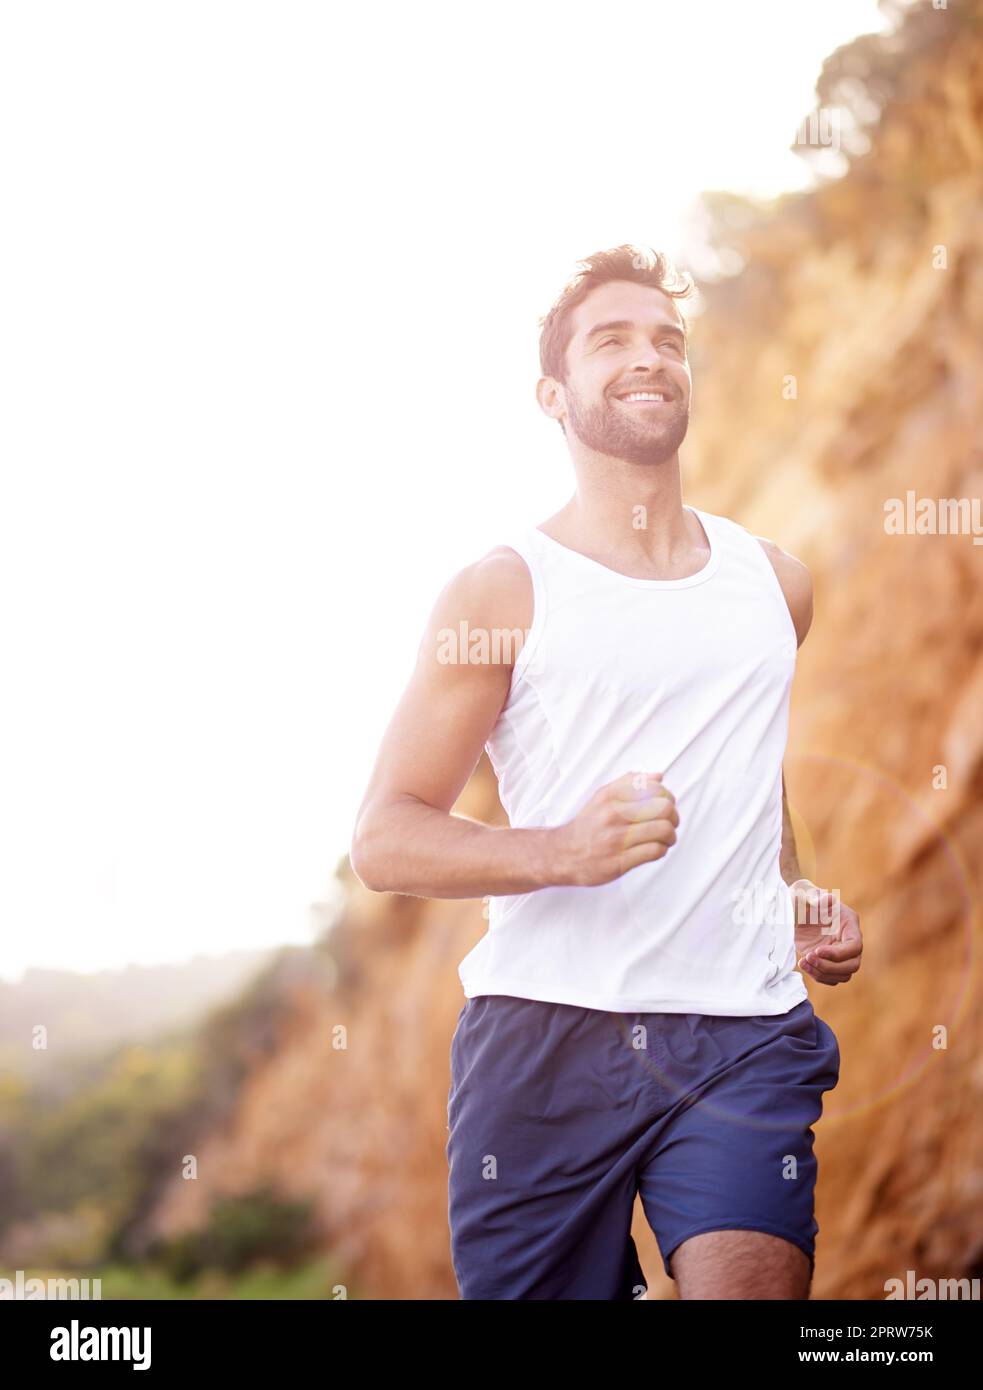 Perfect jogging weather. a handsome young man jogging outdoors. Stock Photo